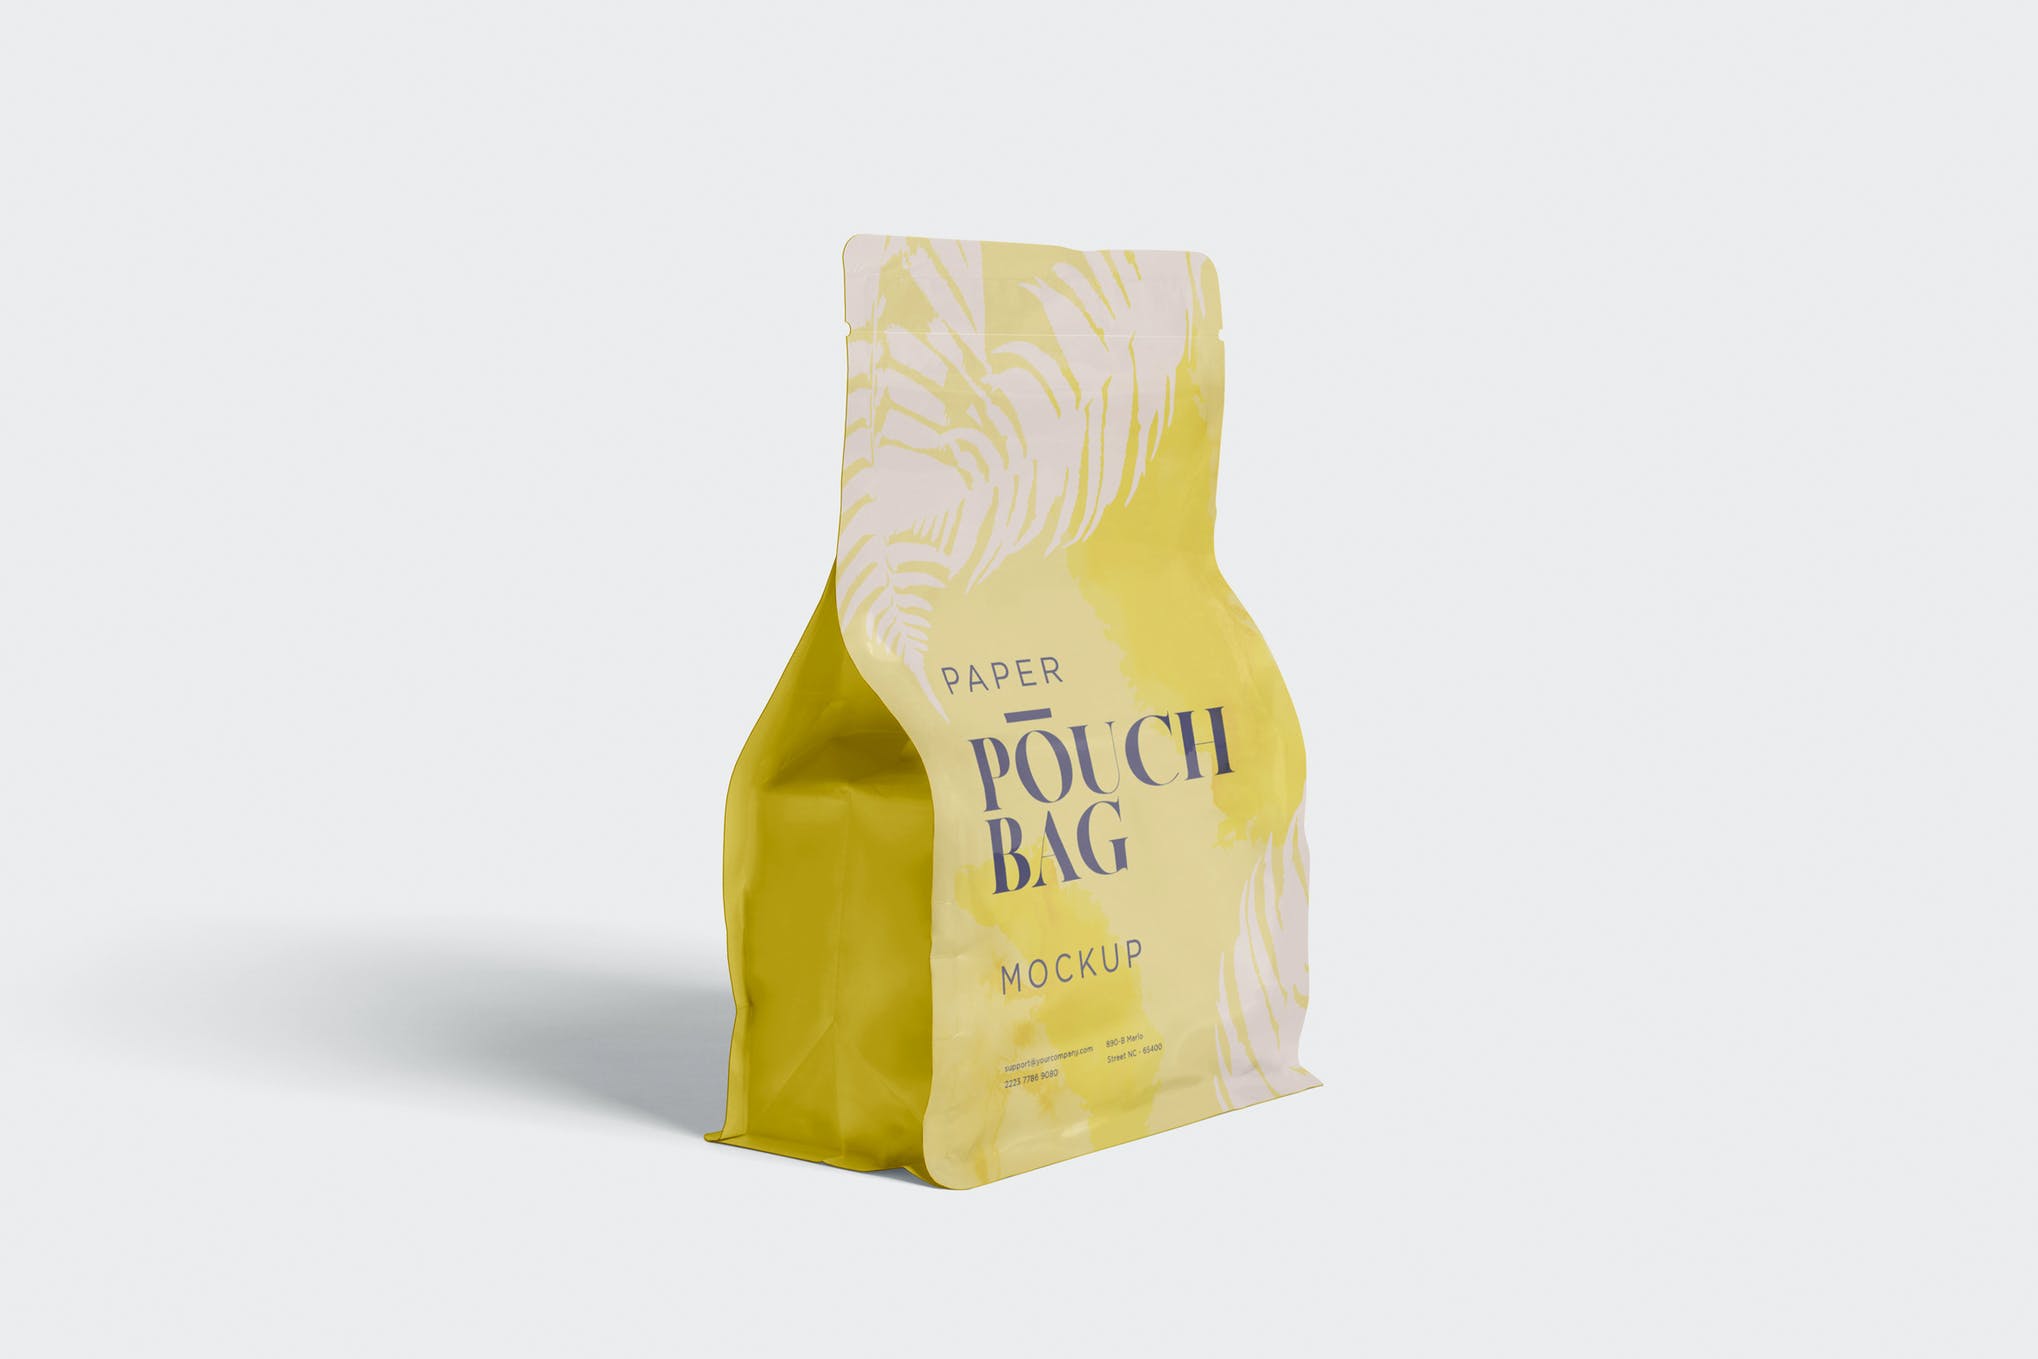 Download 55 Realistic Pouch Packaging Mockup Templates Decolore Net Yellowimages Mockups